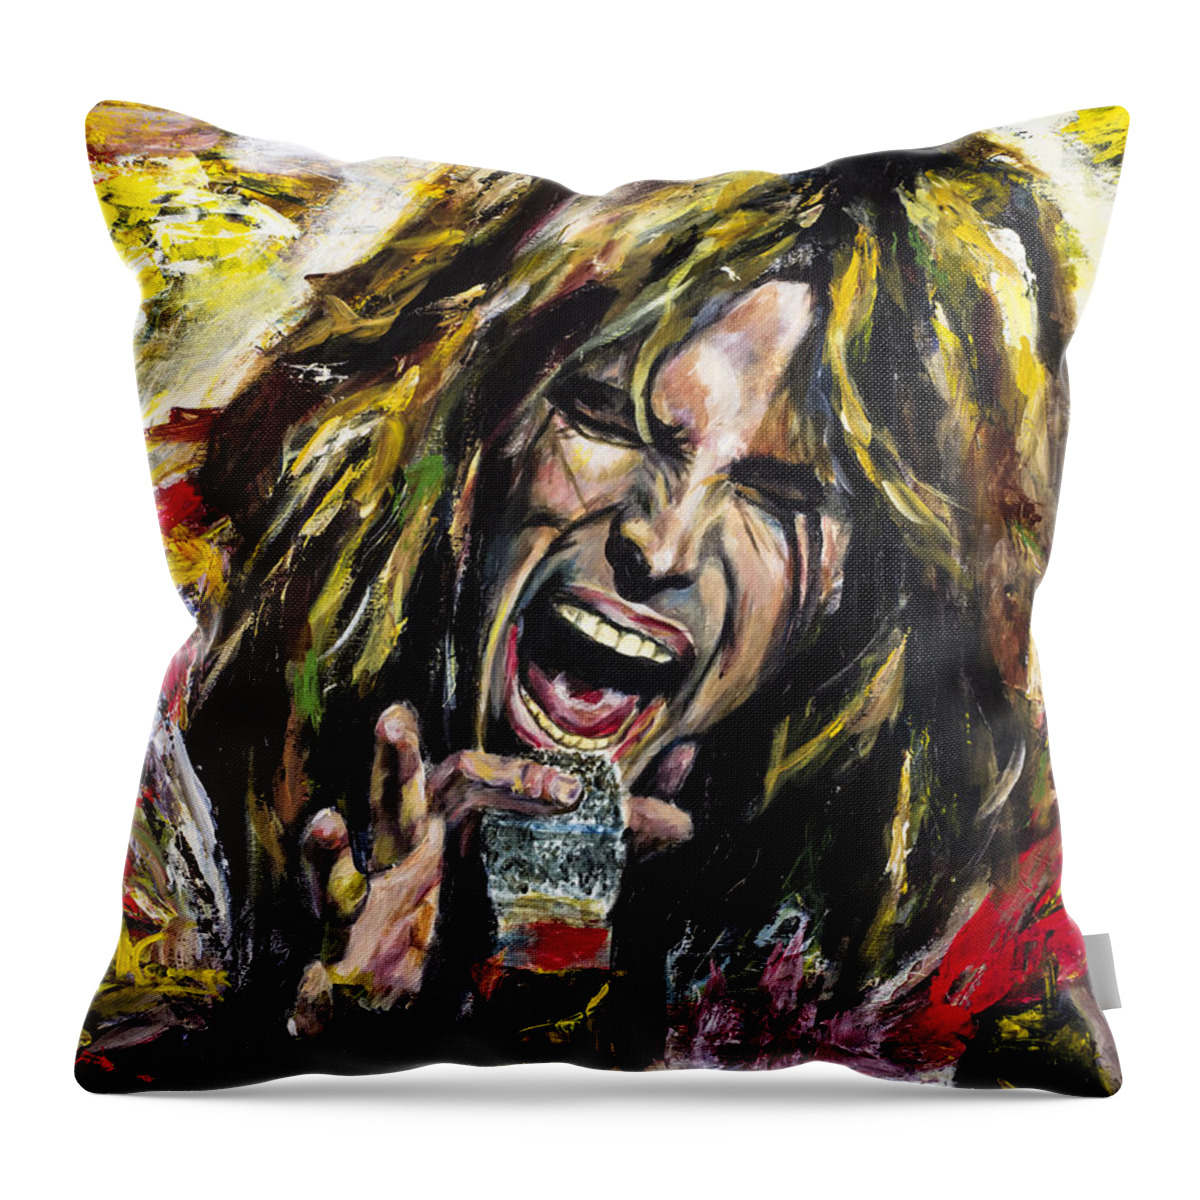 Steven Tyler Throw Pillow featuring the painting Steven Tyler by Mark Courage